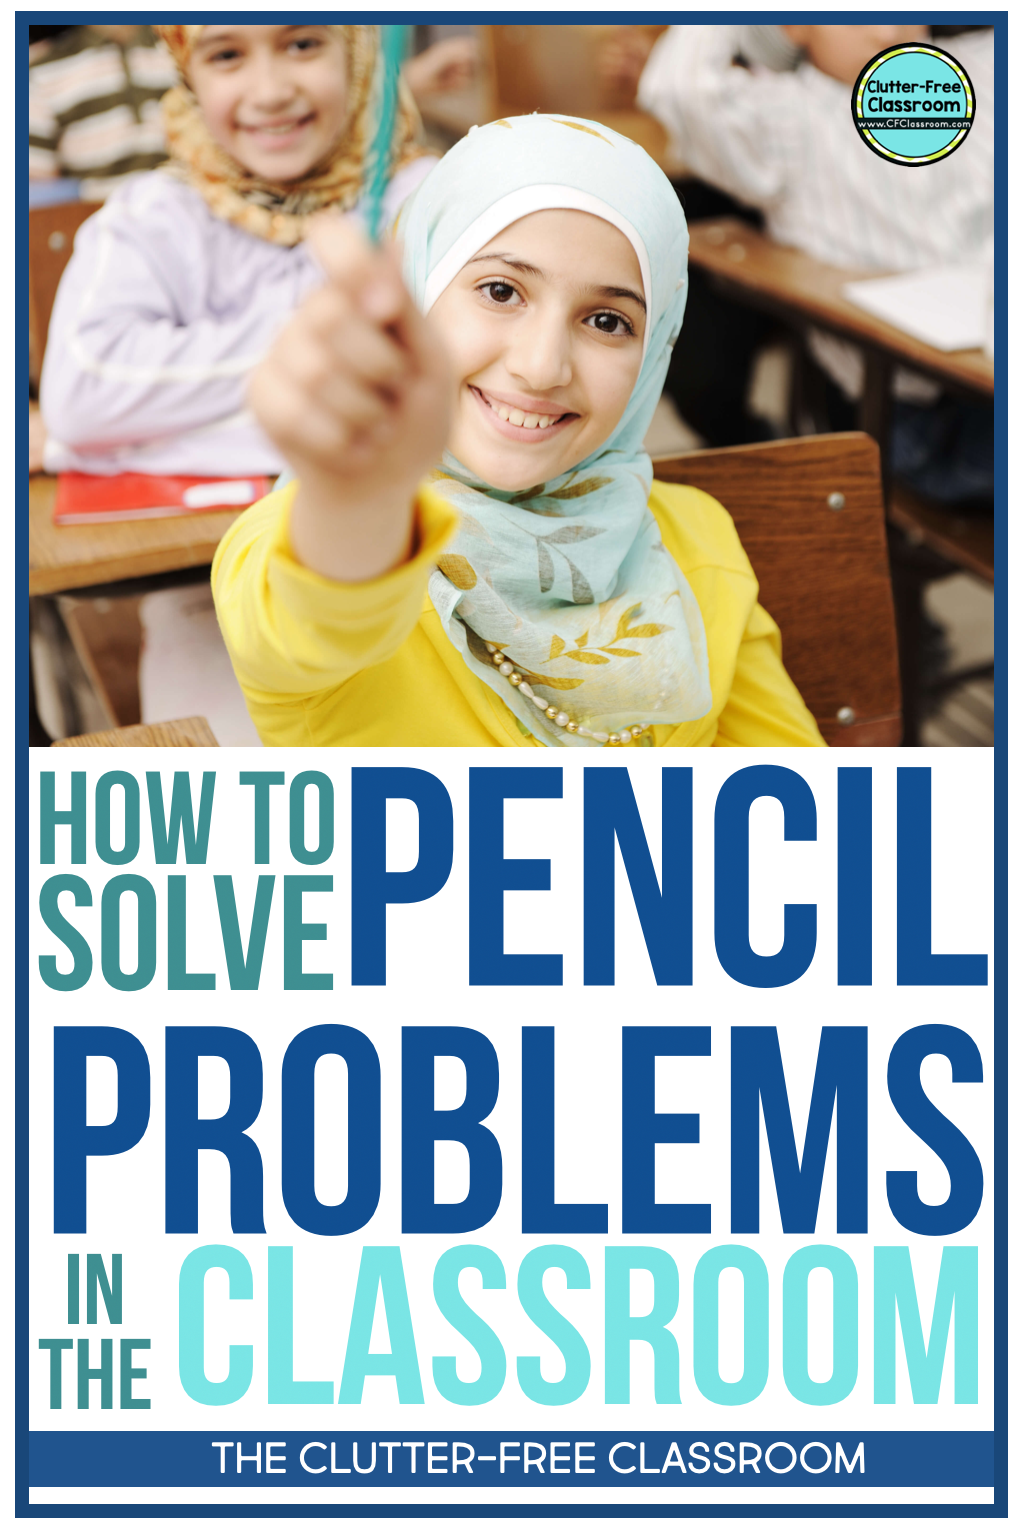 Are you in need of classroom management strategies for pencils in the classroom? Try out these Clutter Free Classroom solutions, tips, and routines for your pencil challenges! No more trying to track pencils in desks!